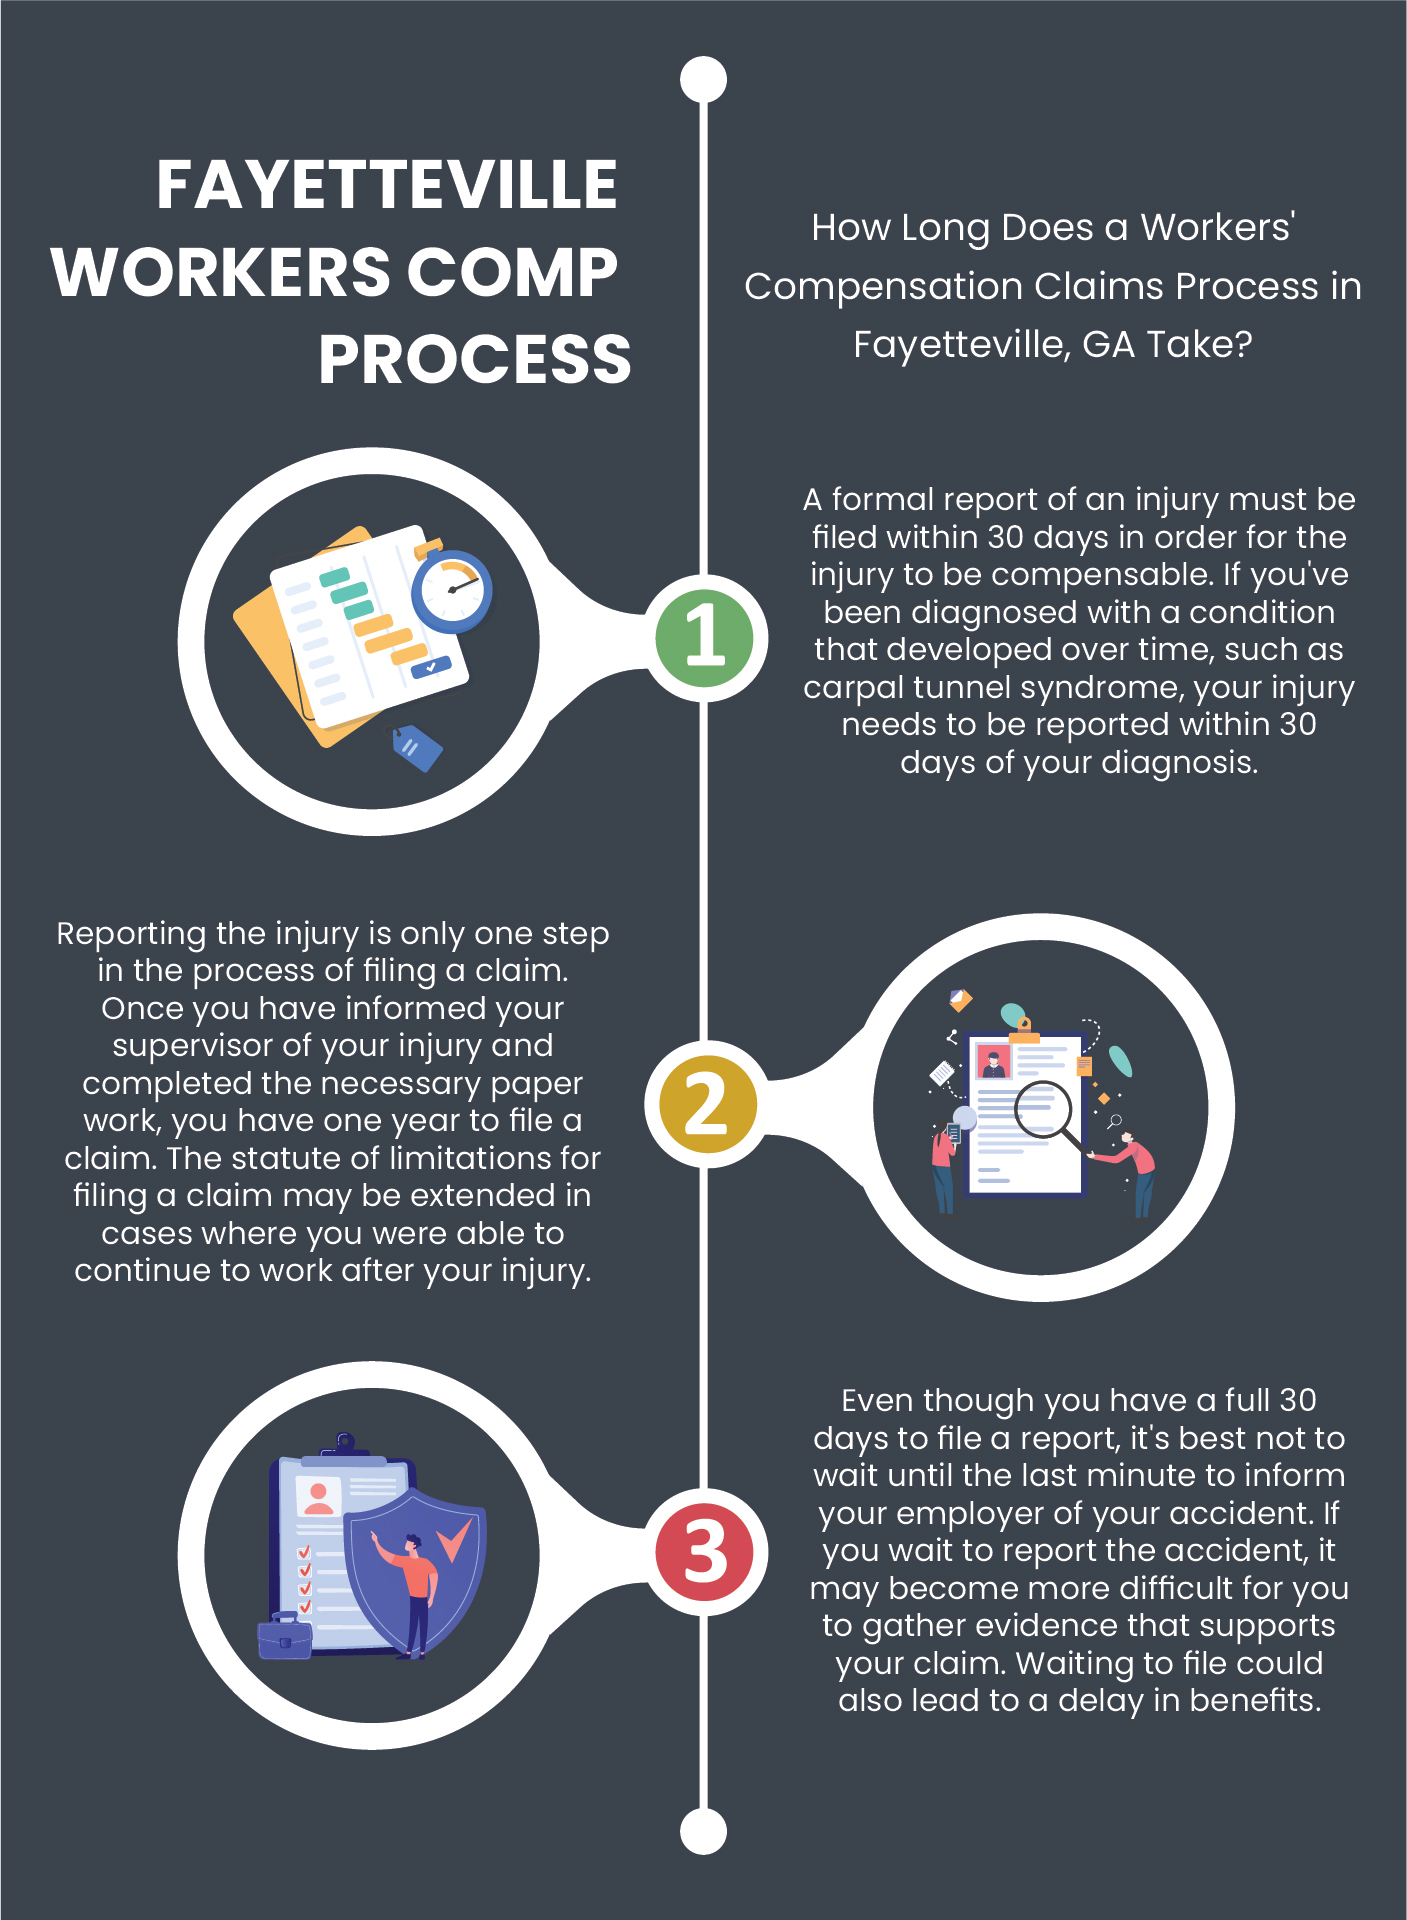 Fayetteville Workers Compensation Claims Process Infographic